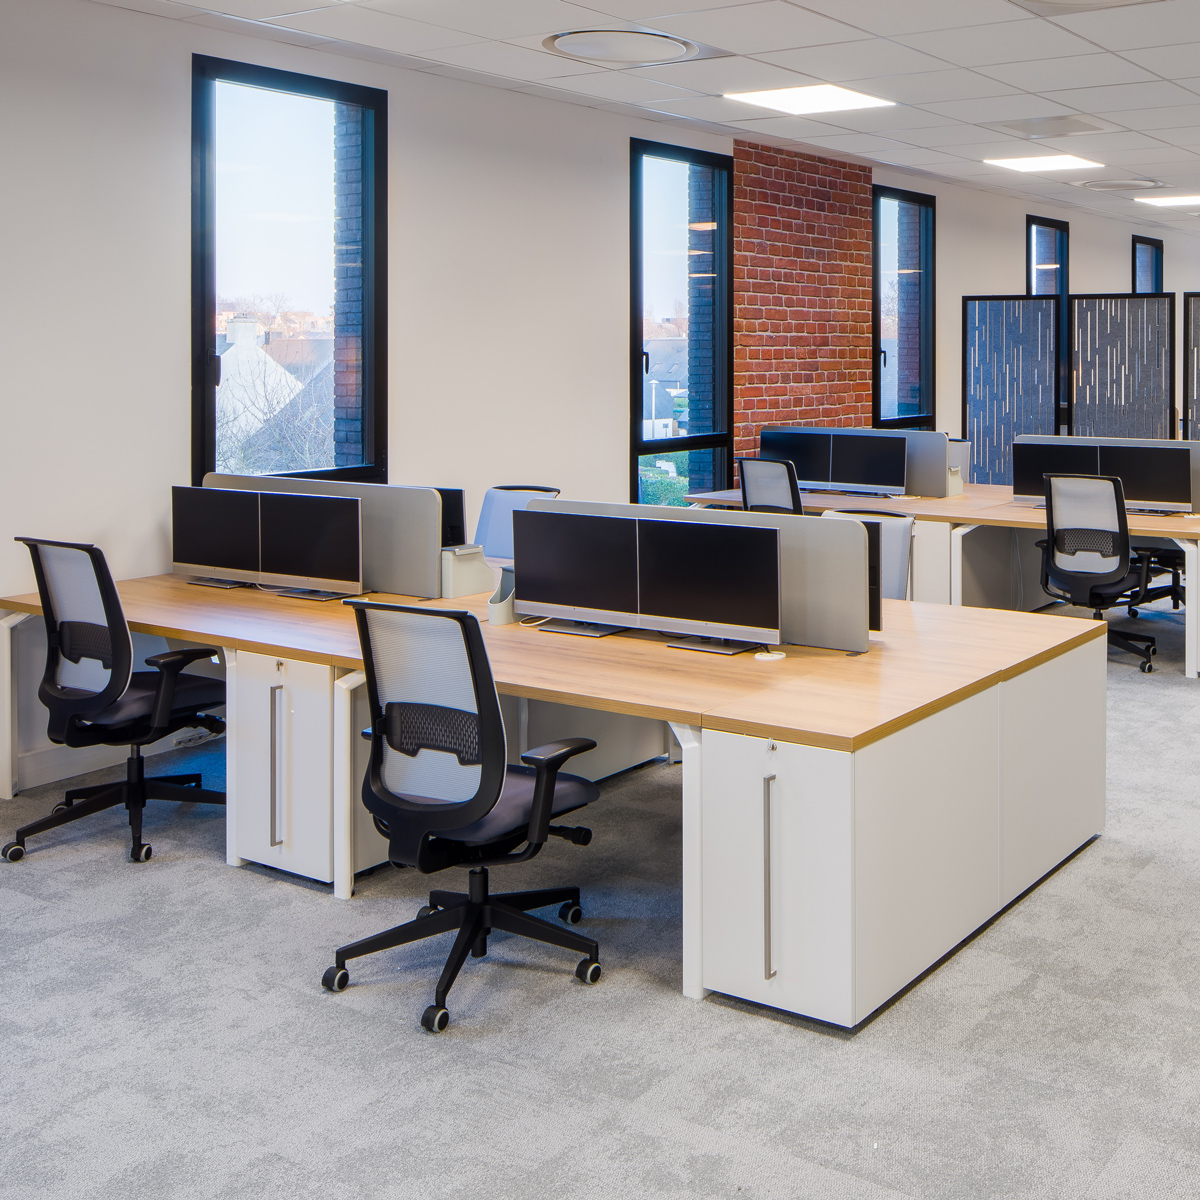 Desks with monitors and office chairs with large windows in the background